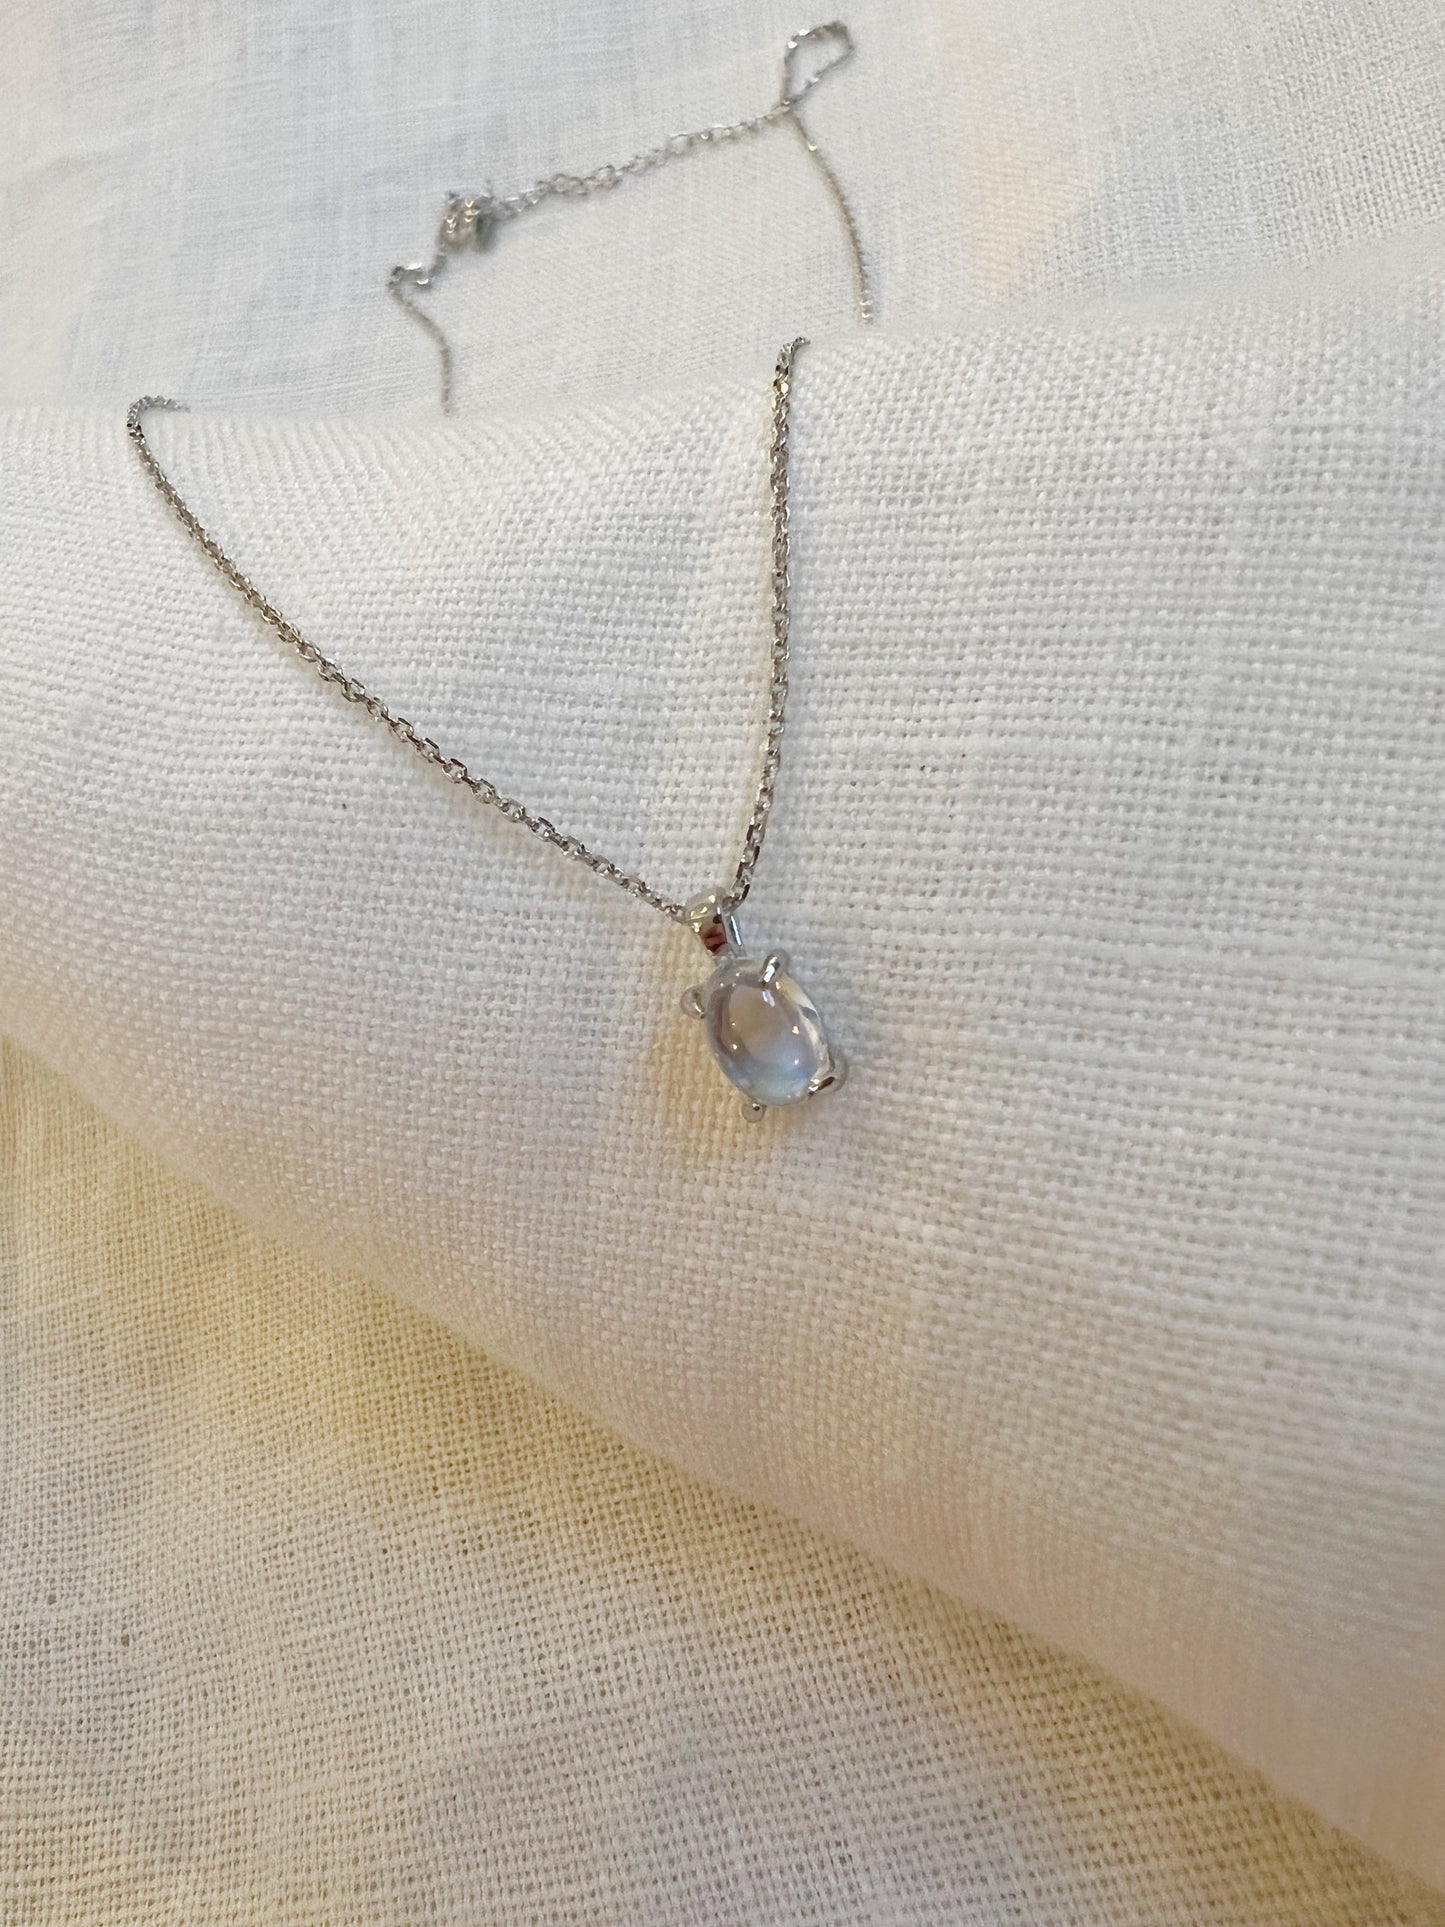 Moon Stone Necklace